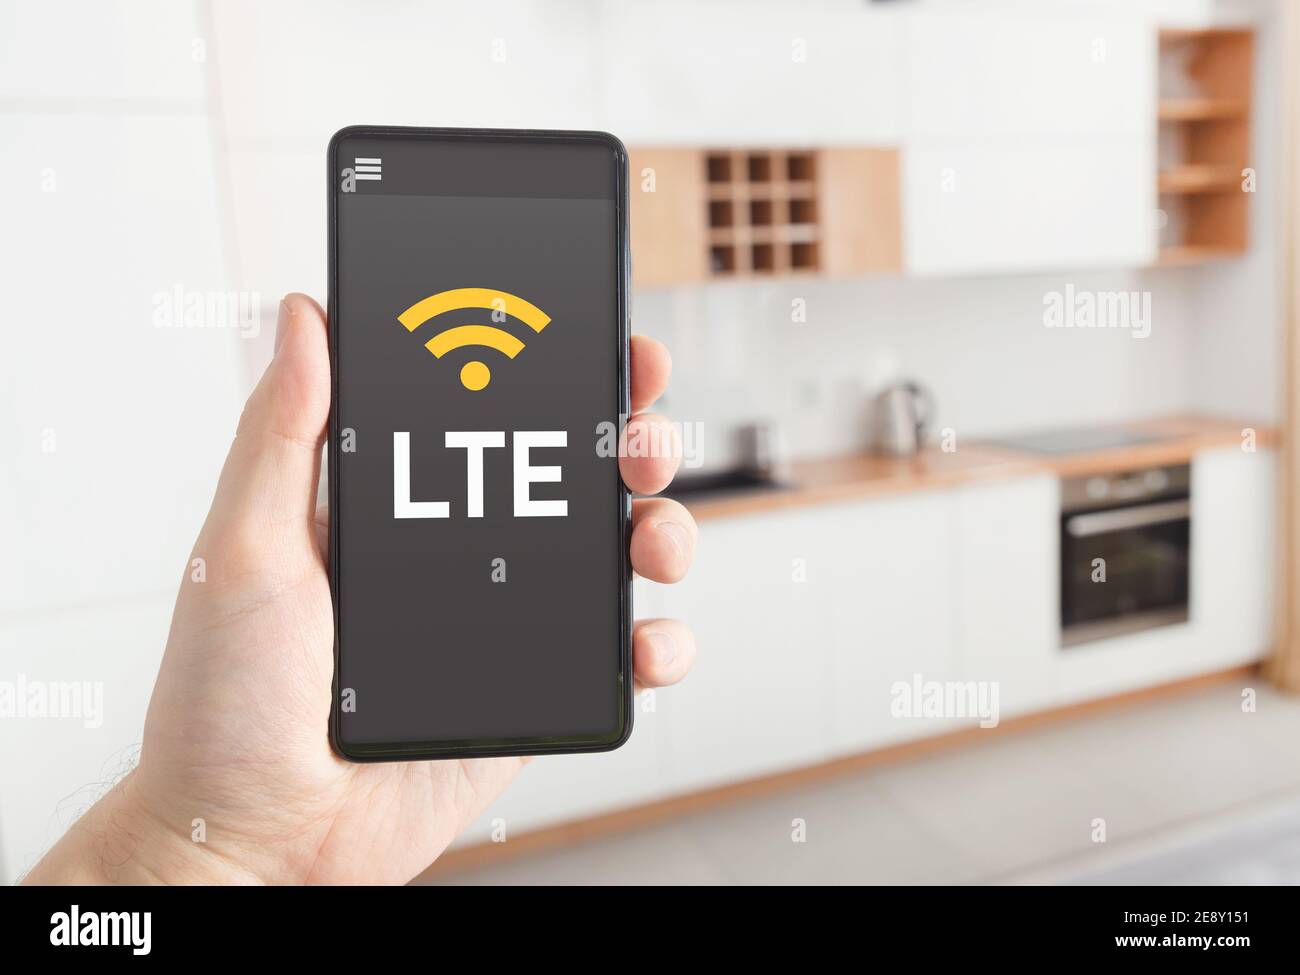 LTE fast internet connection. Man holding smartphone with LTE logo on screen. Stock Photo